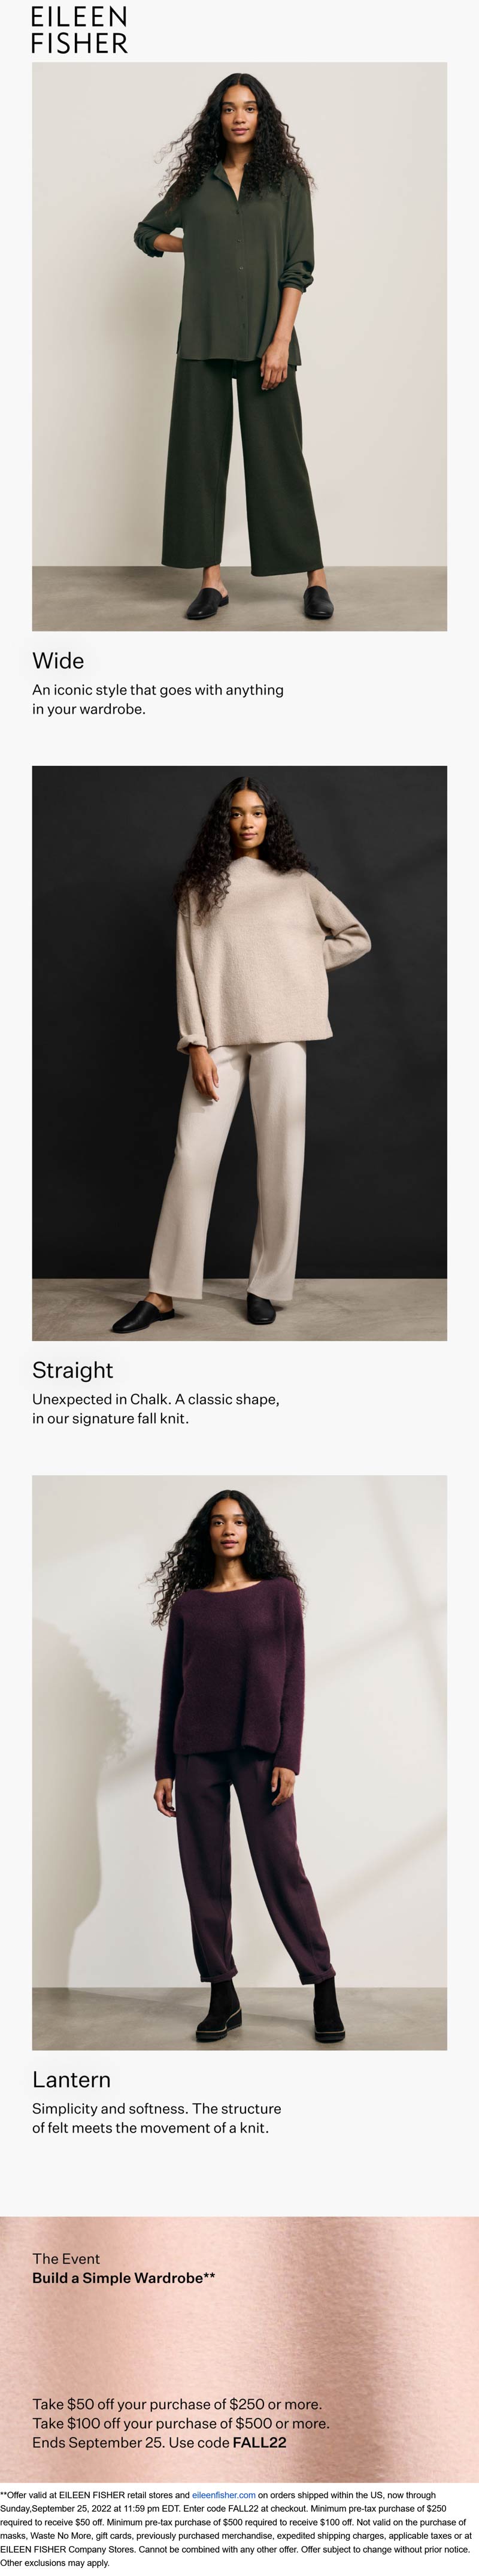 Eileen Fisher stores Coupon  $50-$100 off $250+ at Eileen Fisher, or online via promo code FALL22 #eileenfisher 